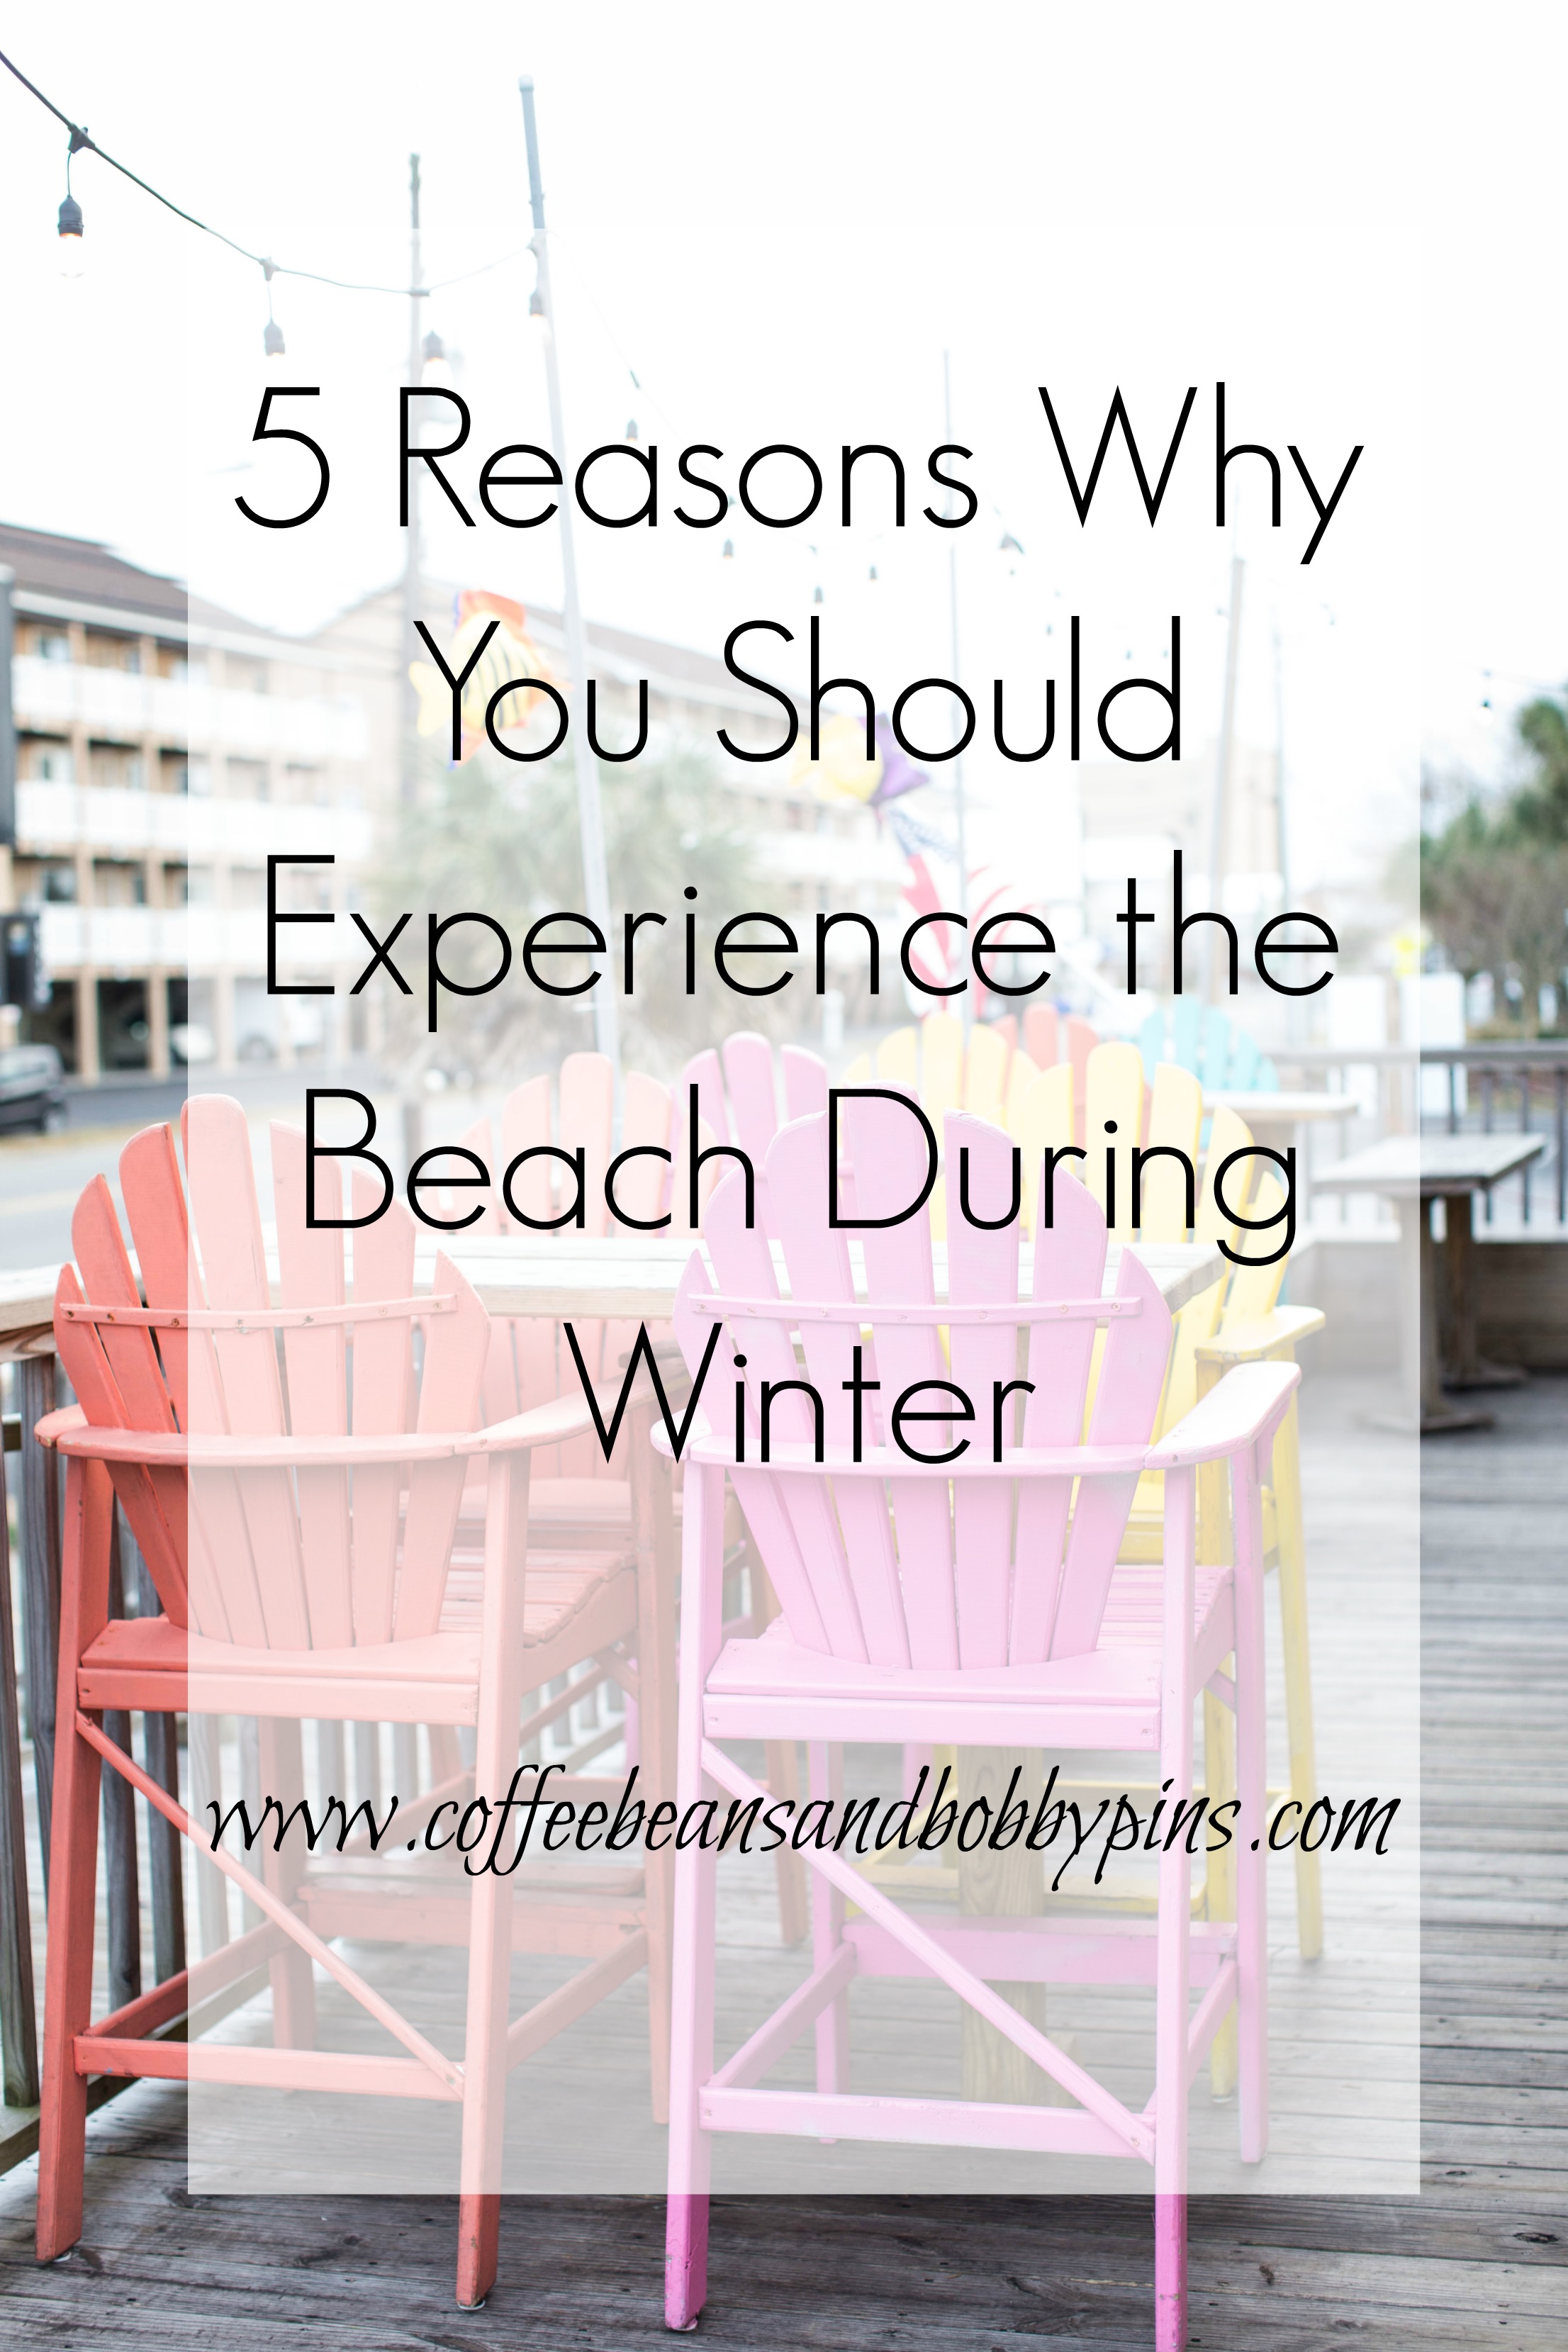 5 Reasons Why You Should Experience the Beach During Winter | coffeebeandandbobbypins.com